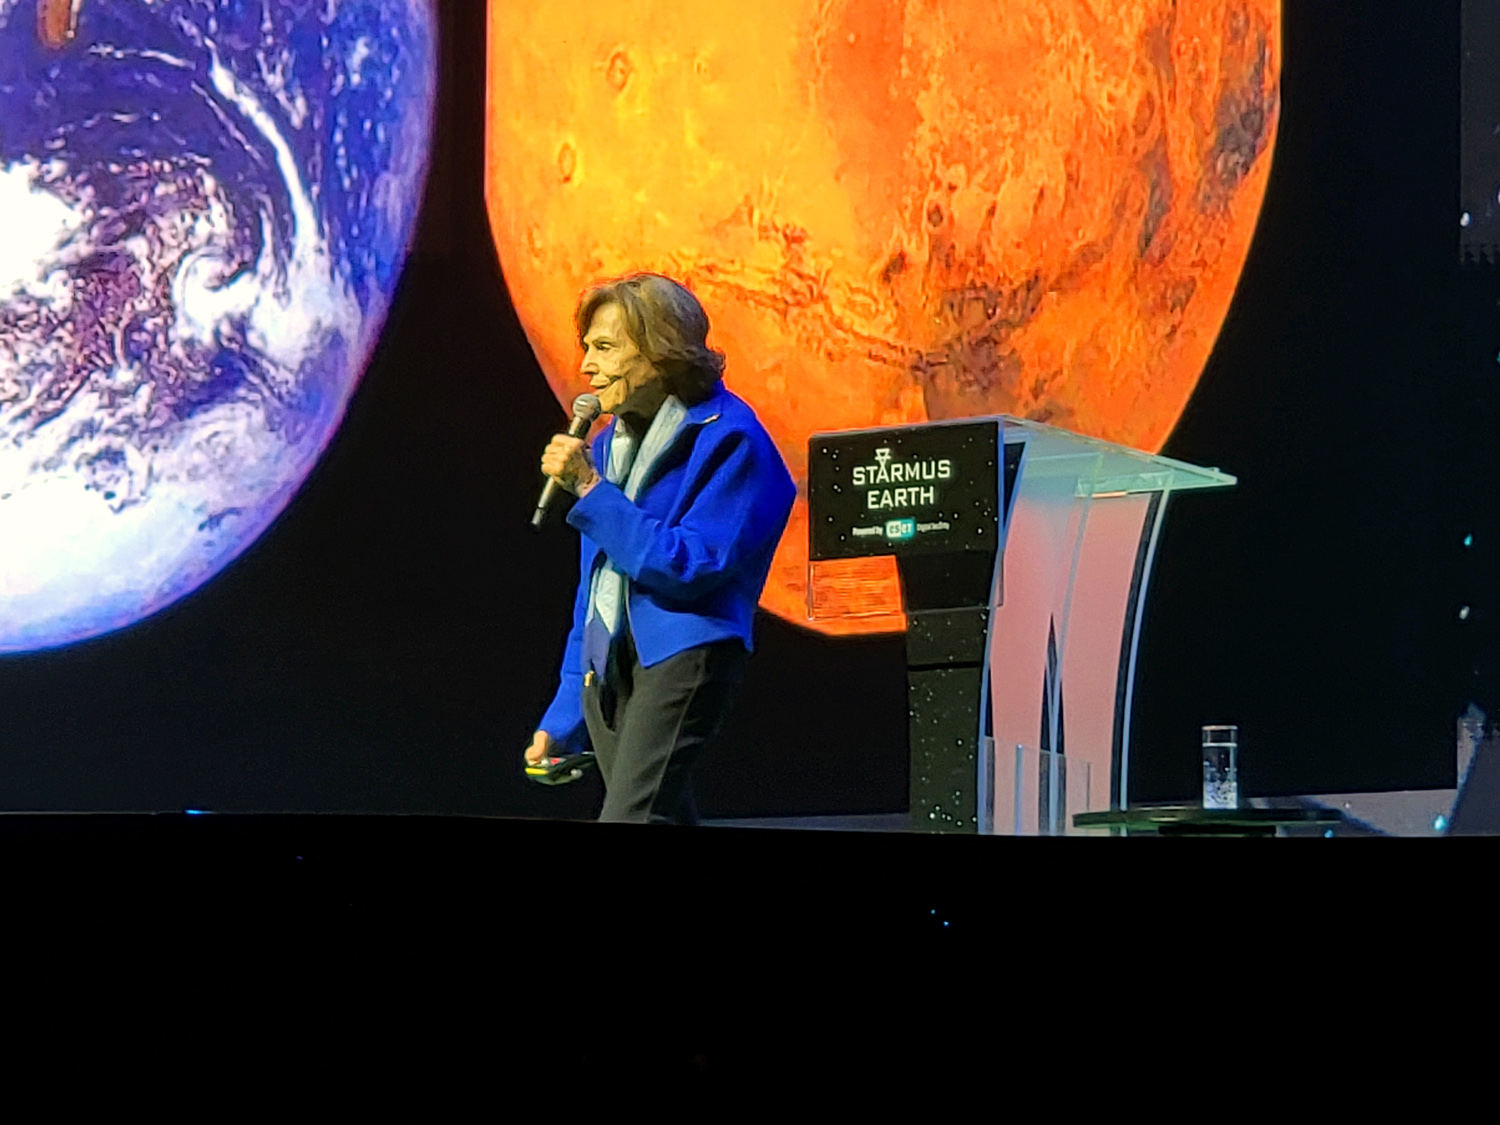 The great oceanographer Sylvia Earle gave us a state-of-the-art analysis of what is happening with the world’s oceans, and what we need to do about it. Credit: David J. Eicher.